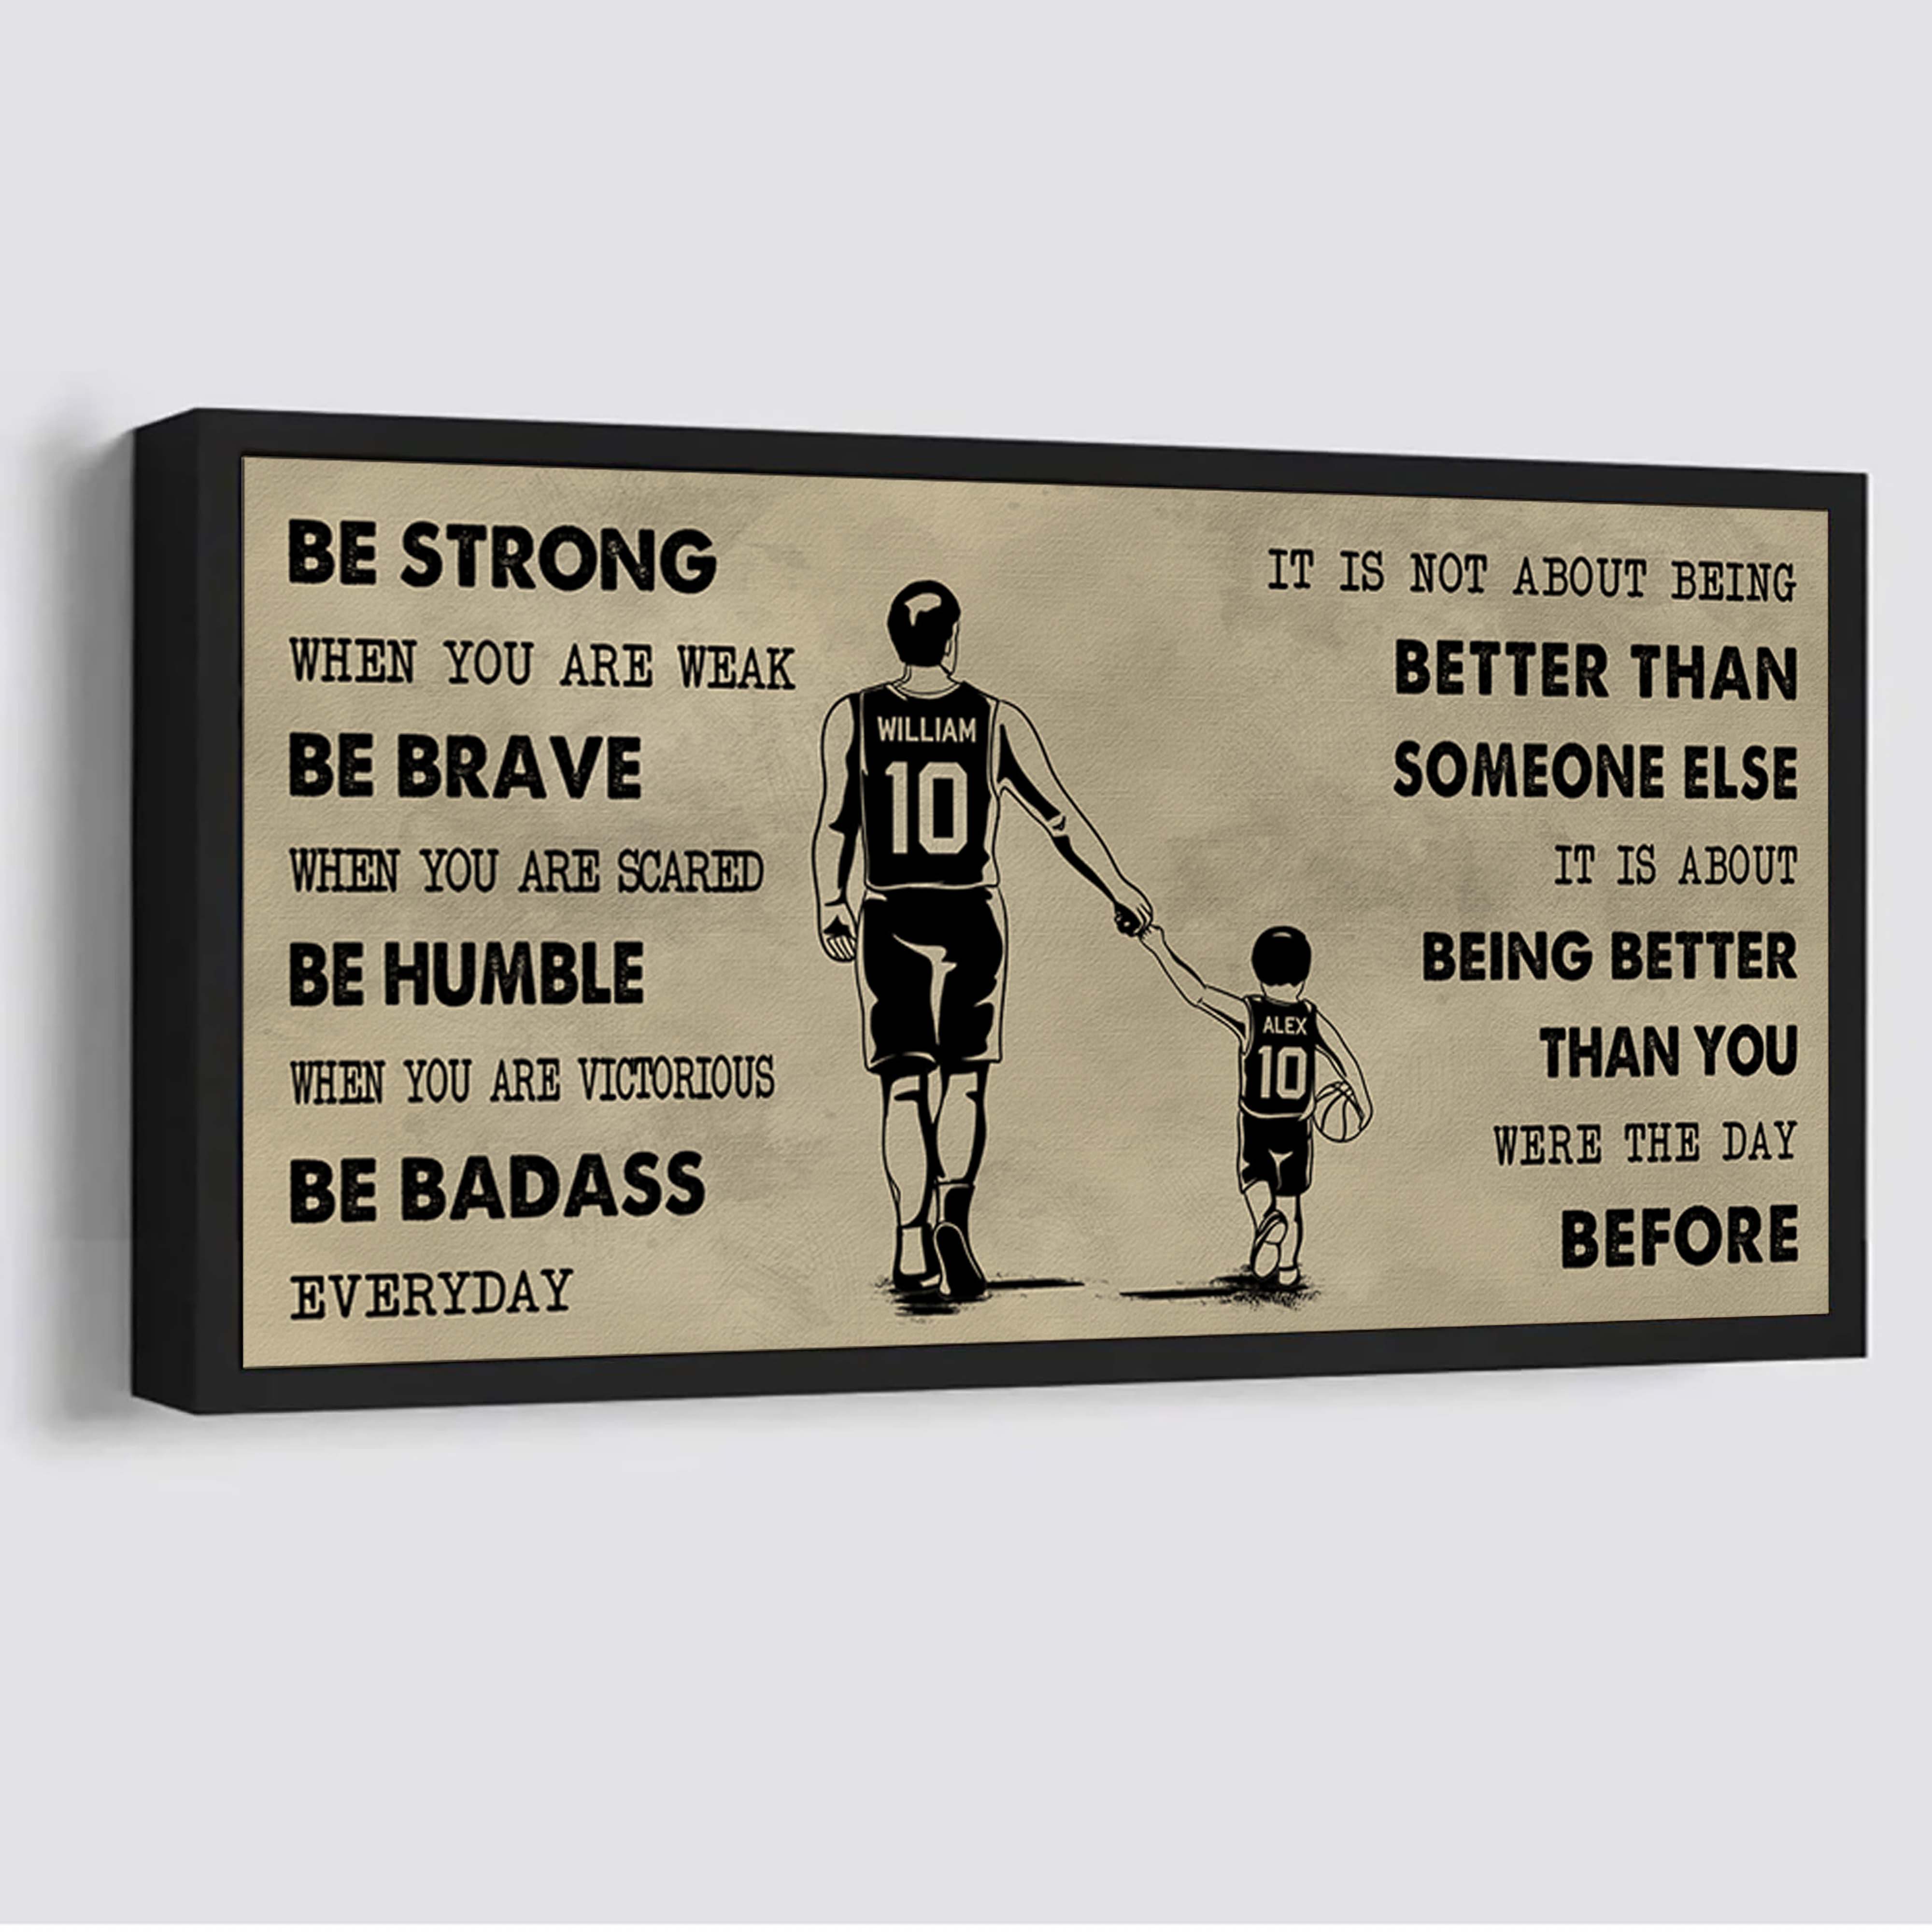 American Football Poster Canvas From Dad To Son Be Strong When You Are Weak - It Is Not About Being Better Than Someone Else